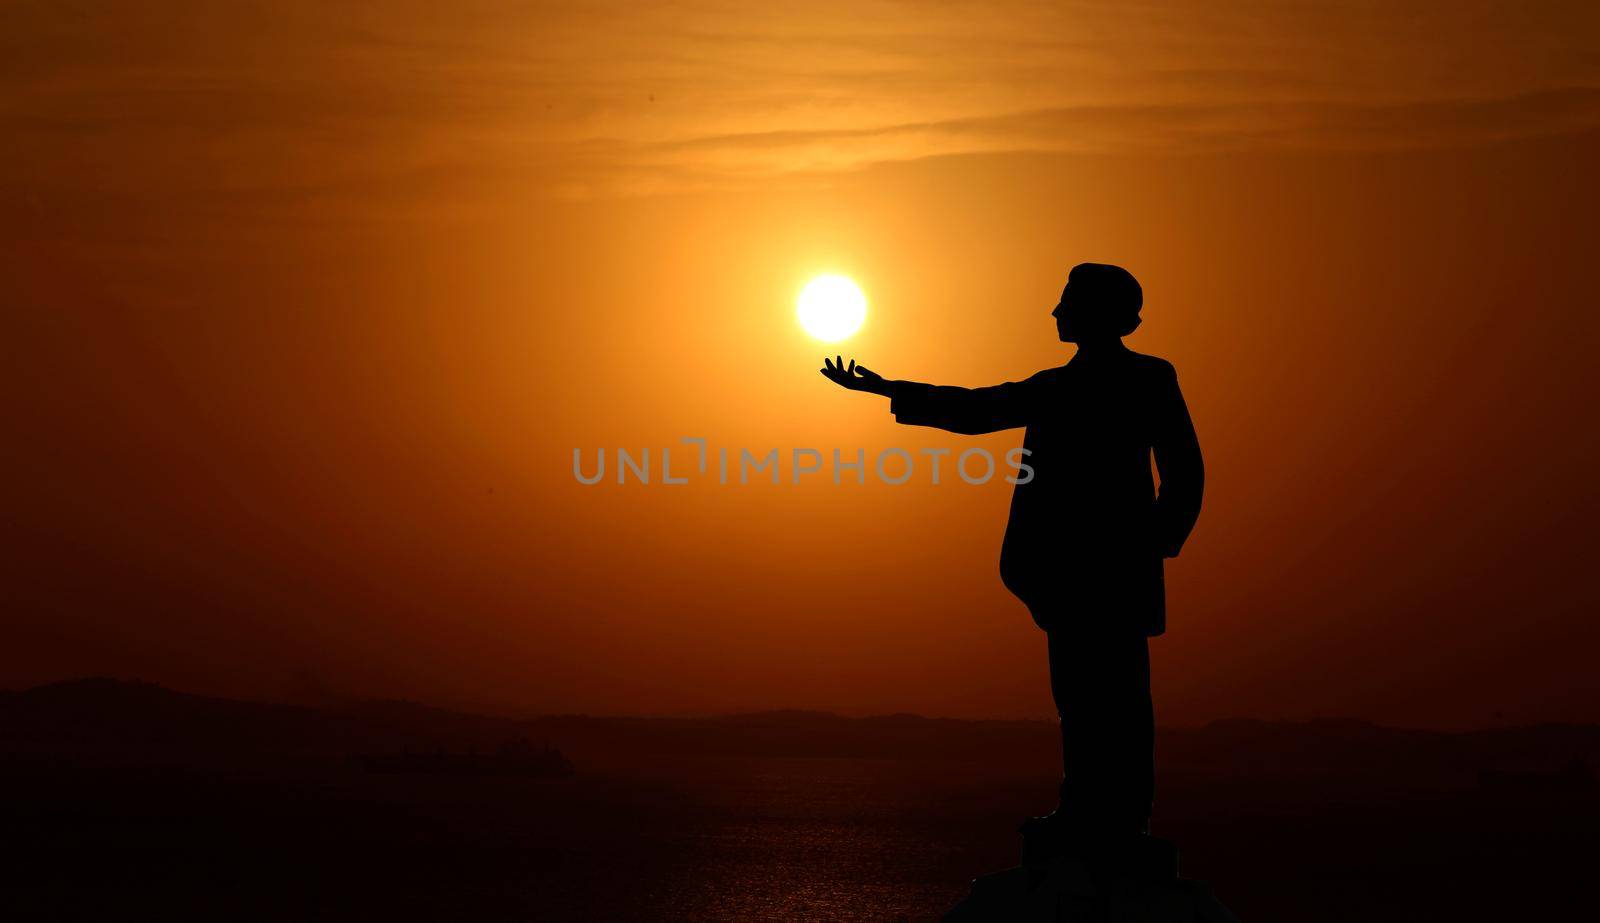 salvador, bahia / brazil - October 8, 2018: statue of the poet Castro Alves is seen at sunset in Salvador.








